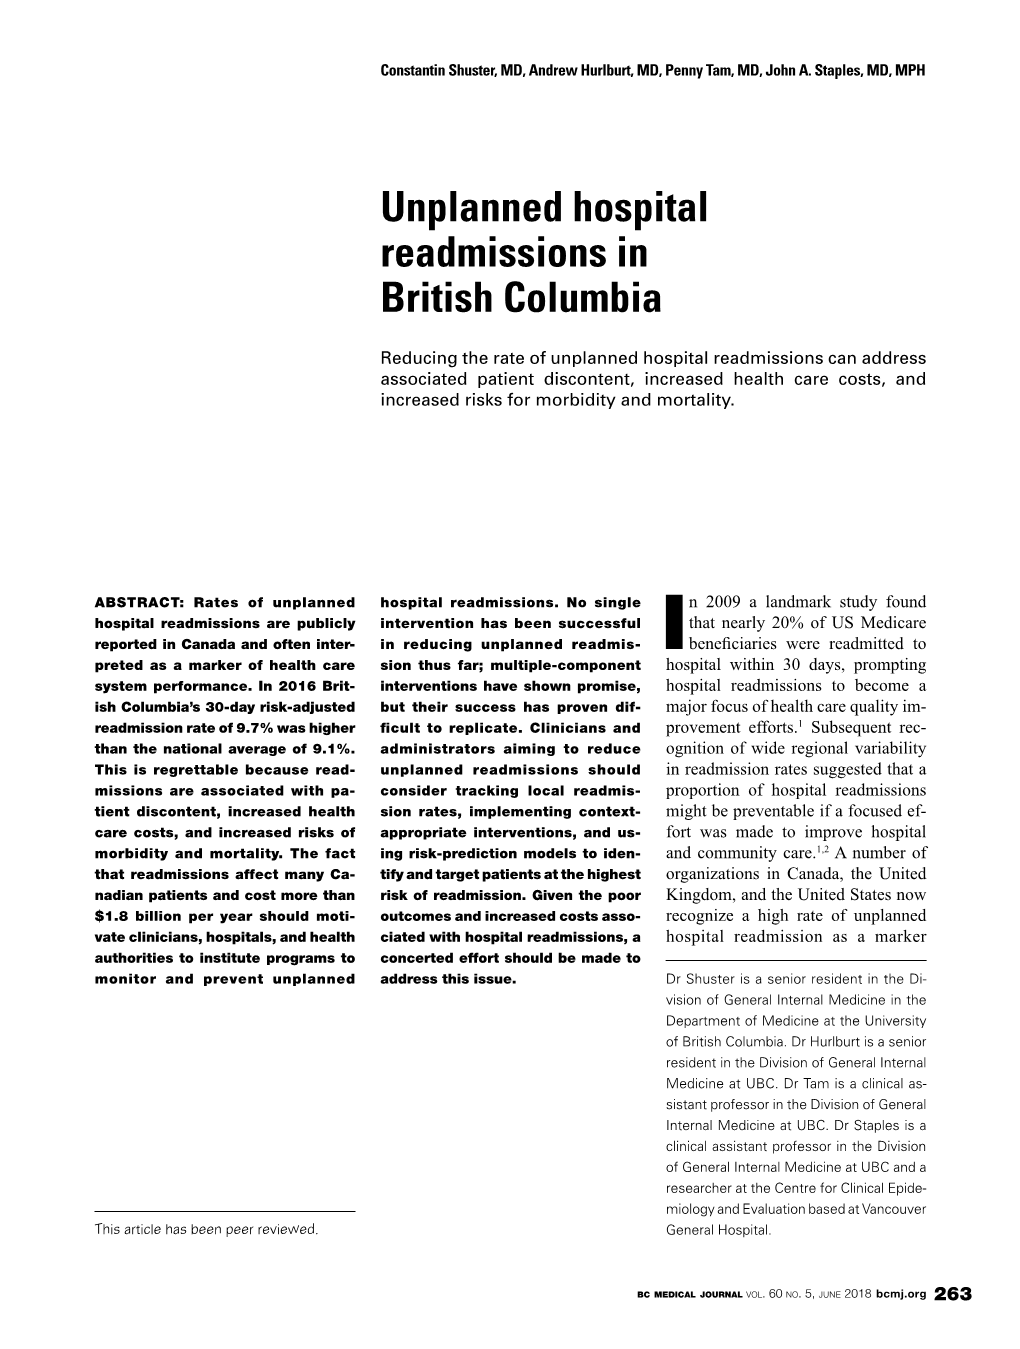 Unplanned Hospital Readmissions in British Columbia